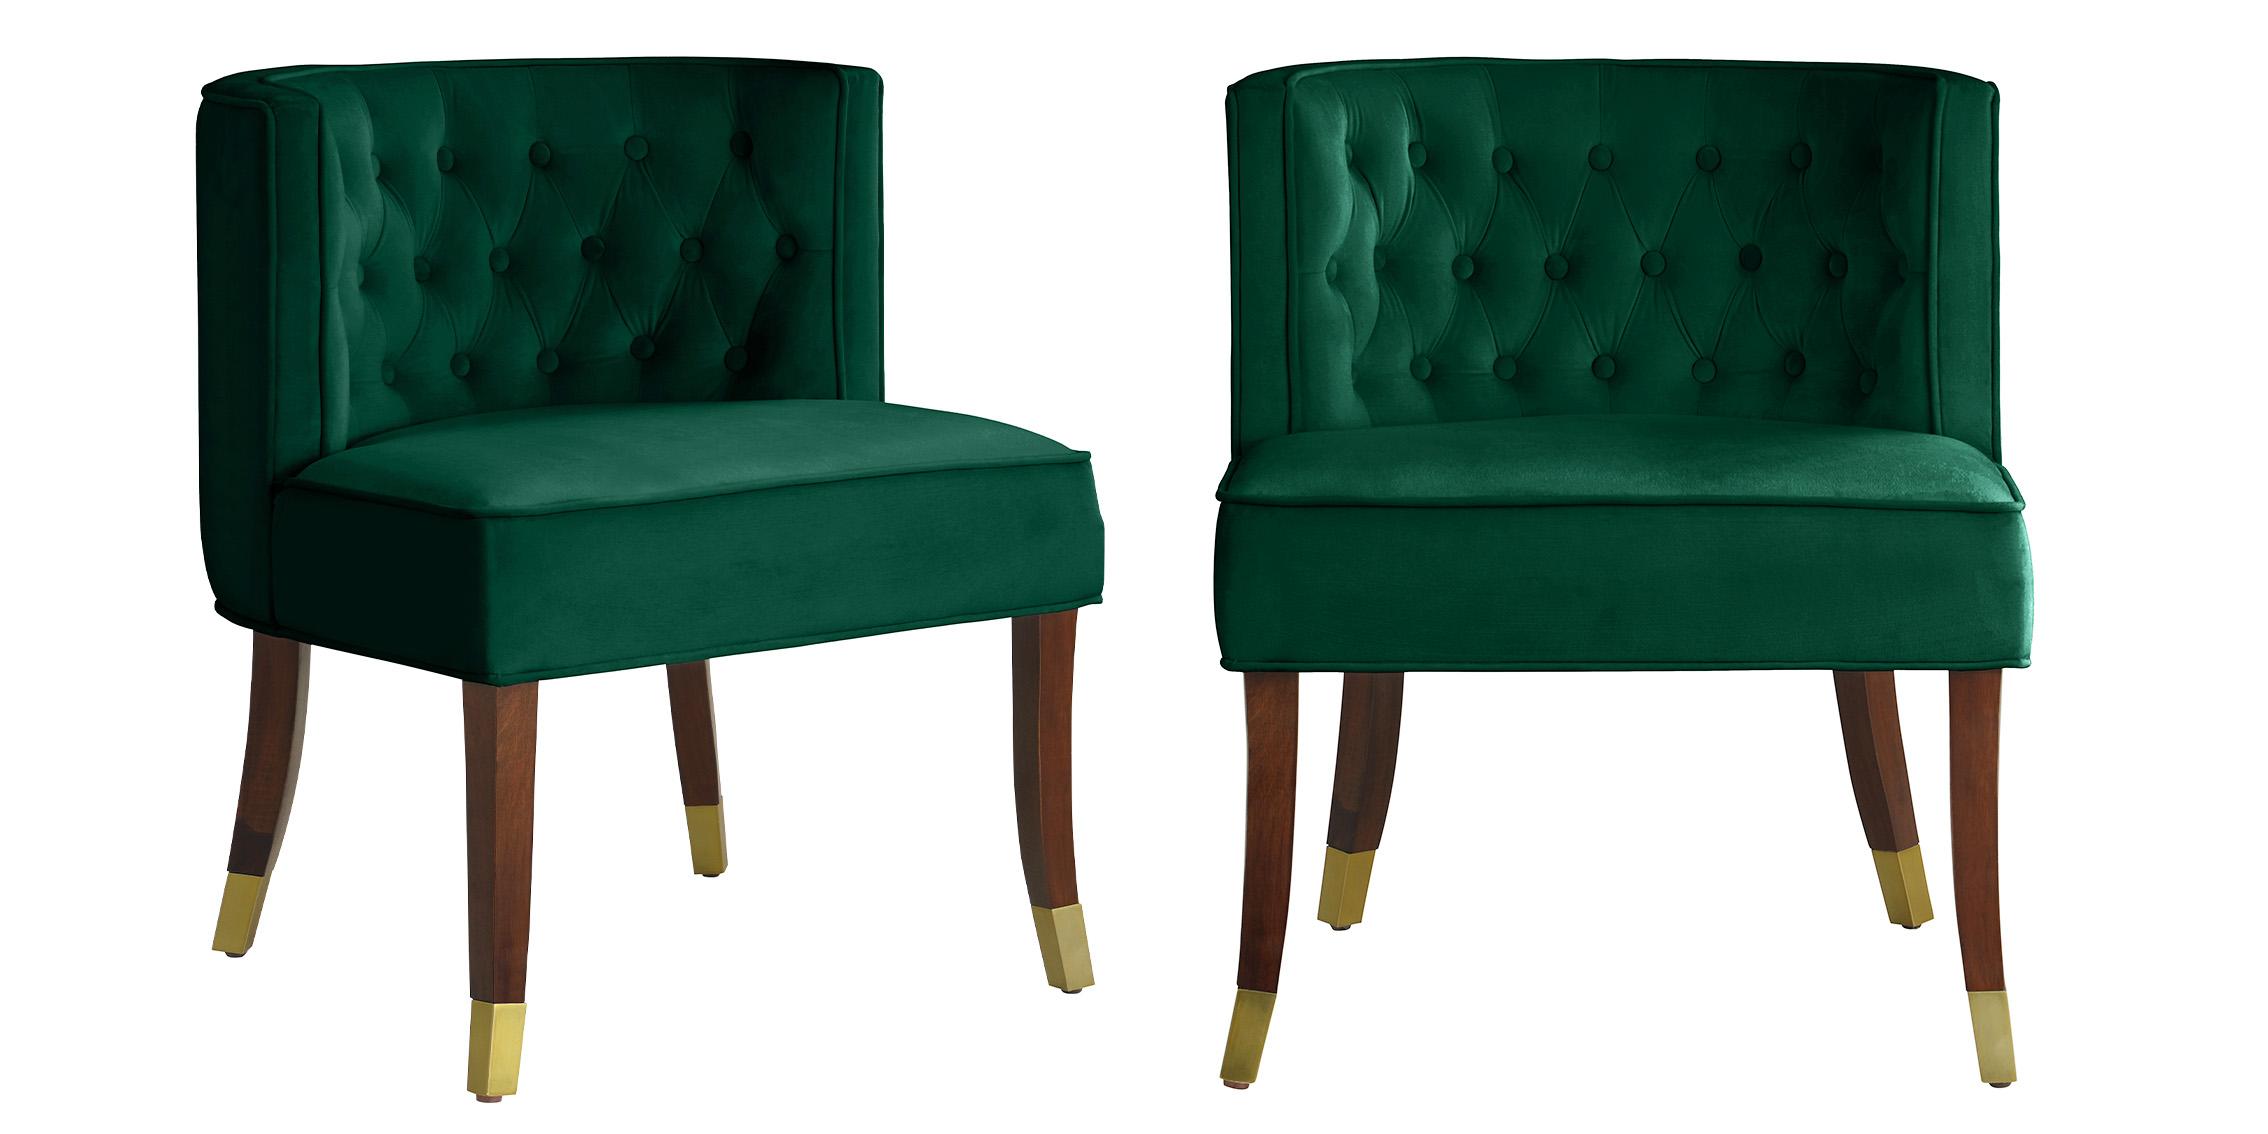 Classic Dining Chair Set PERRY 933Green-C 933Green-C-Set-2 in Espresso, Green Velvet